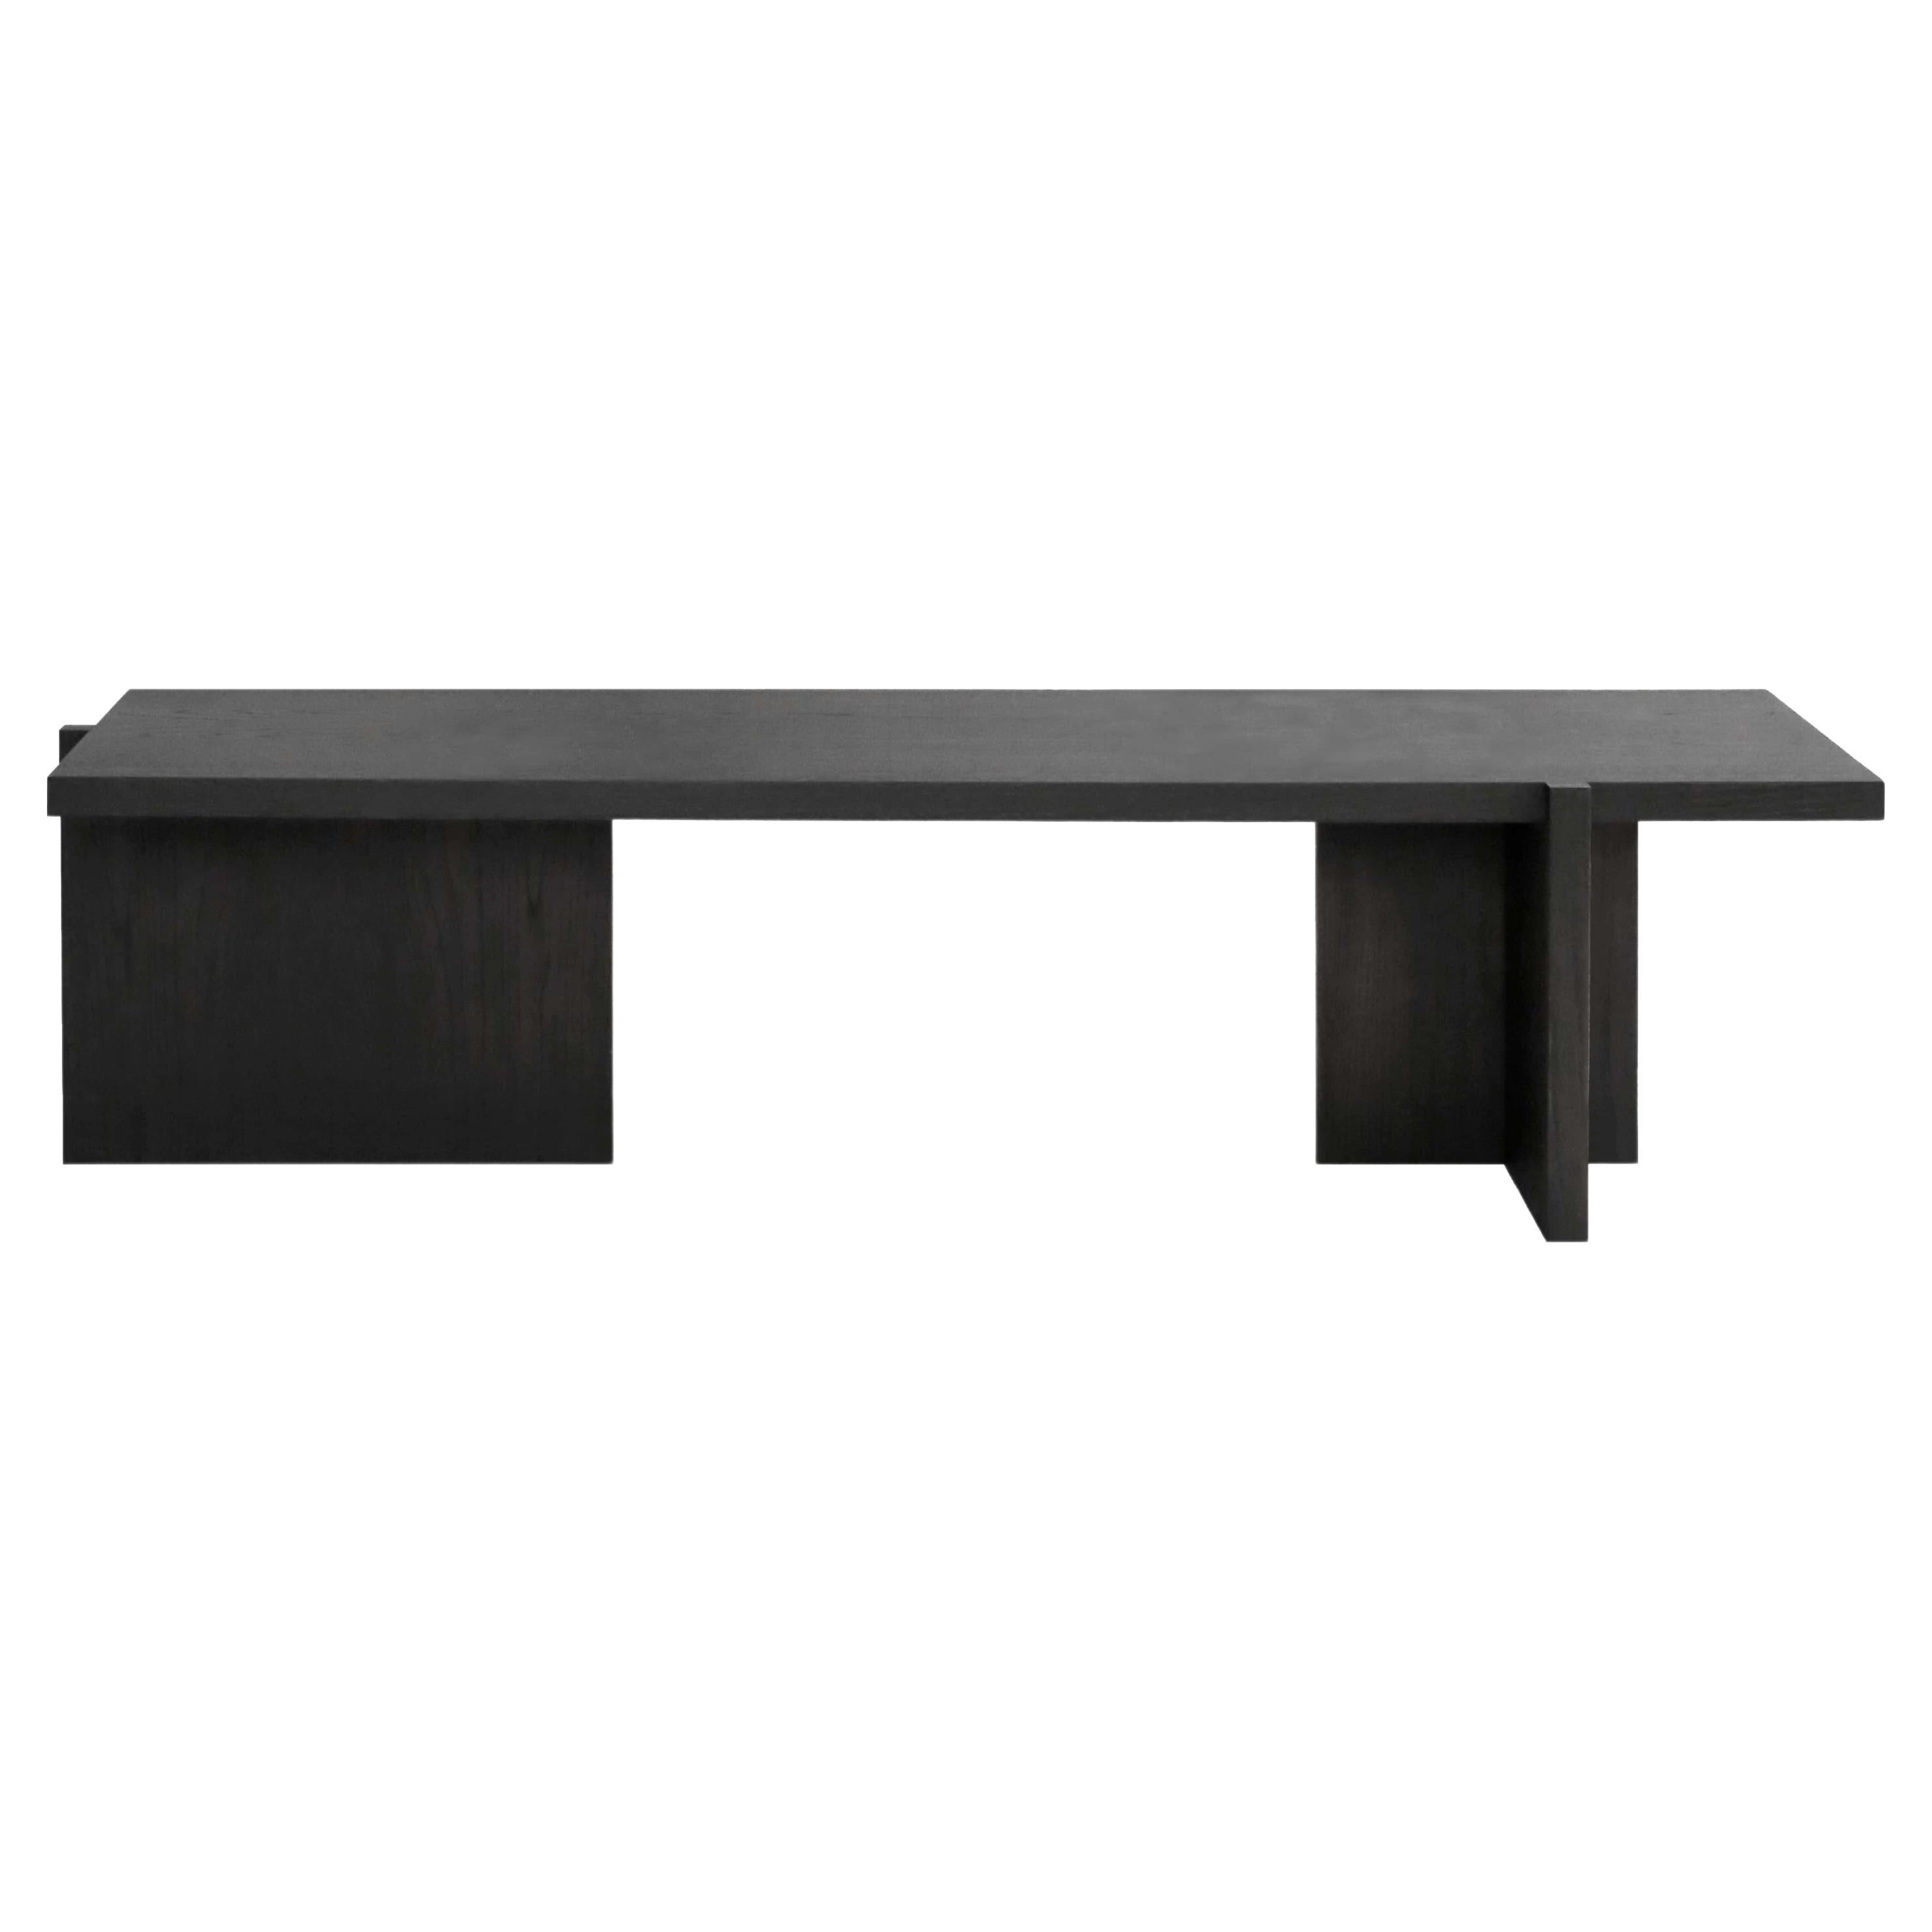 Dolmen Coffee Table, Modern Form and Sooty Oak Color For Sale